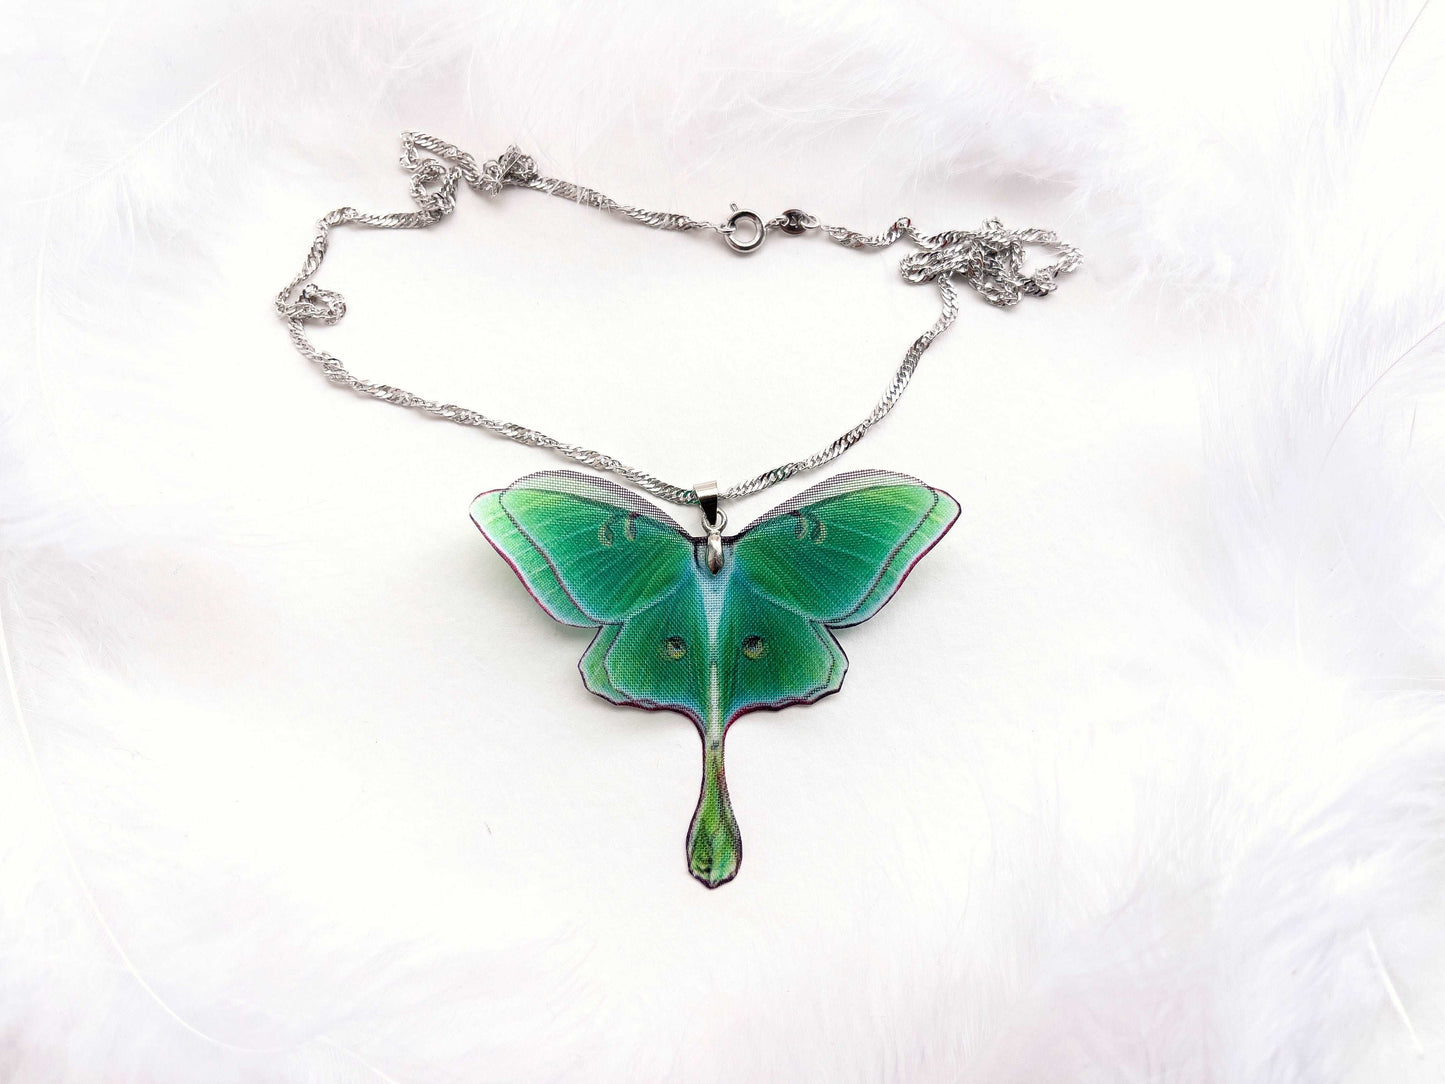 Eco-friendly and handmade Green Lunar Moth Pendant - A beautiful and sustainable choice